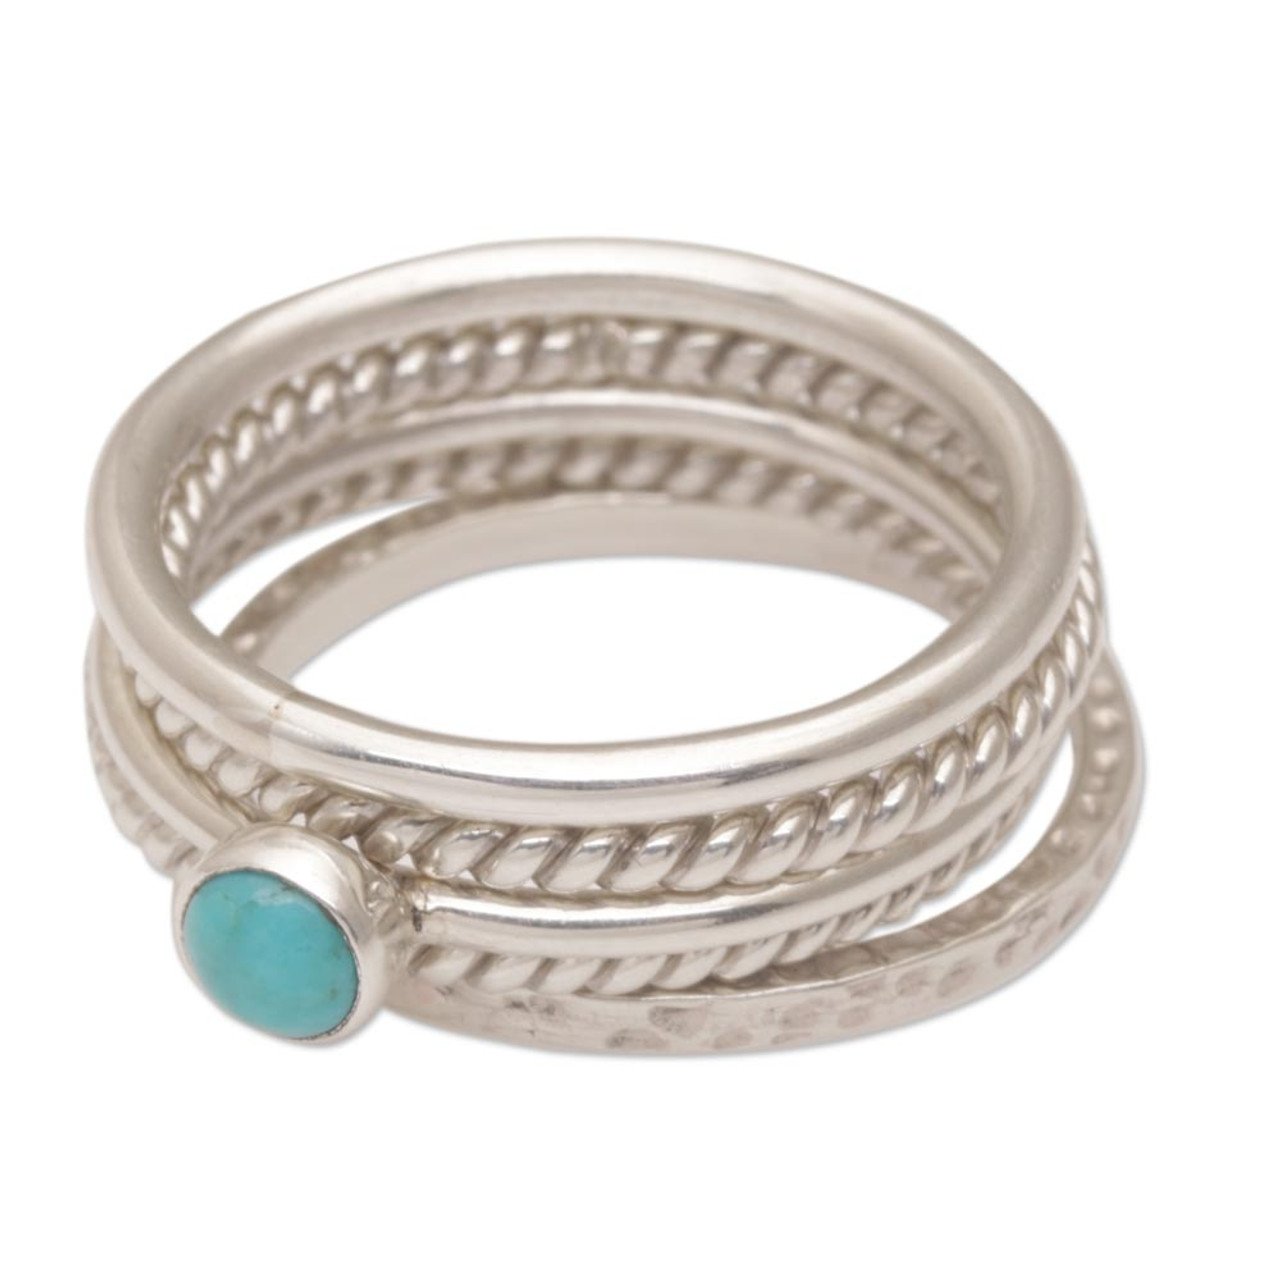 Handmade Sterling Silver Stacking Rings (Set of 3), 'Together